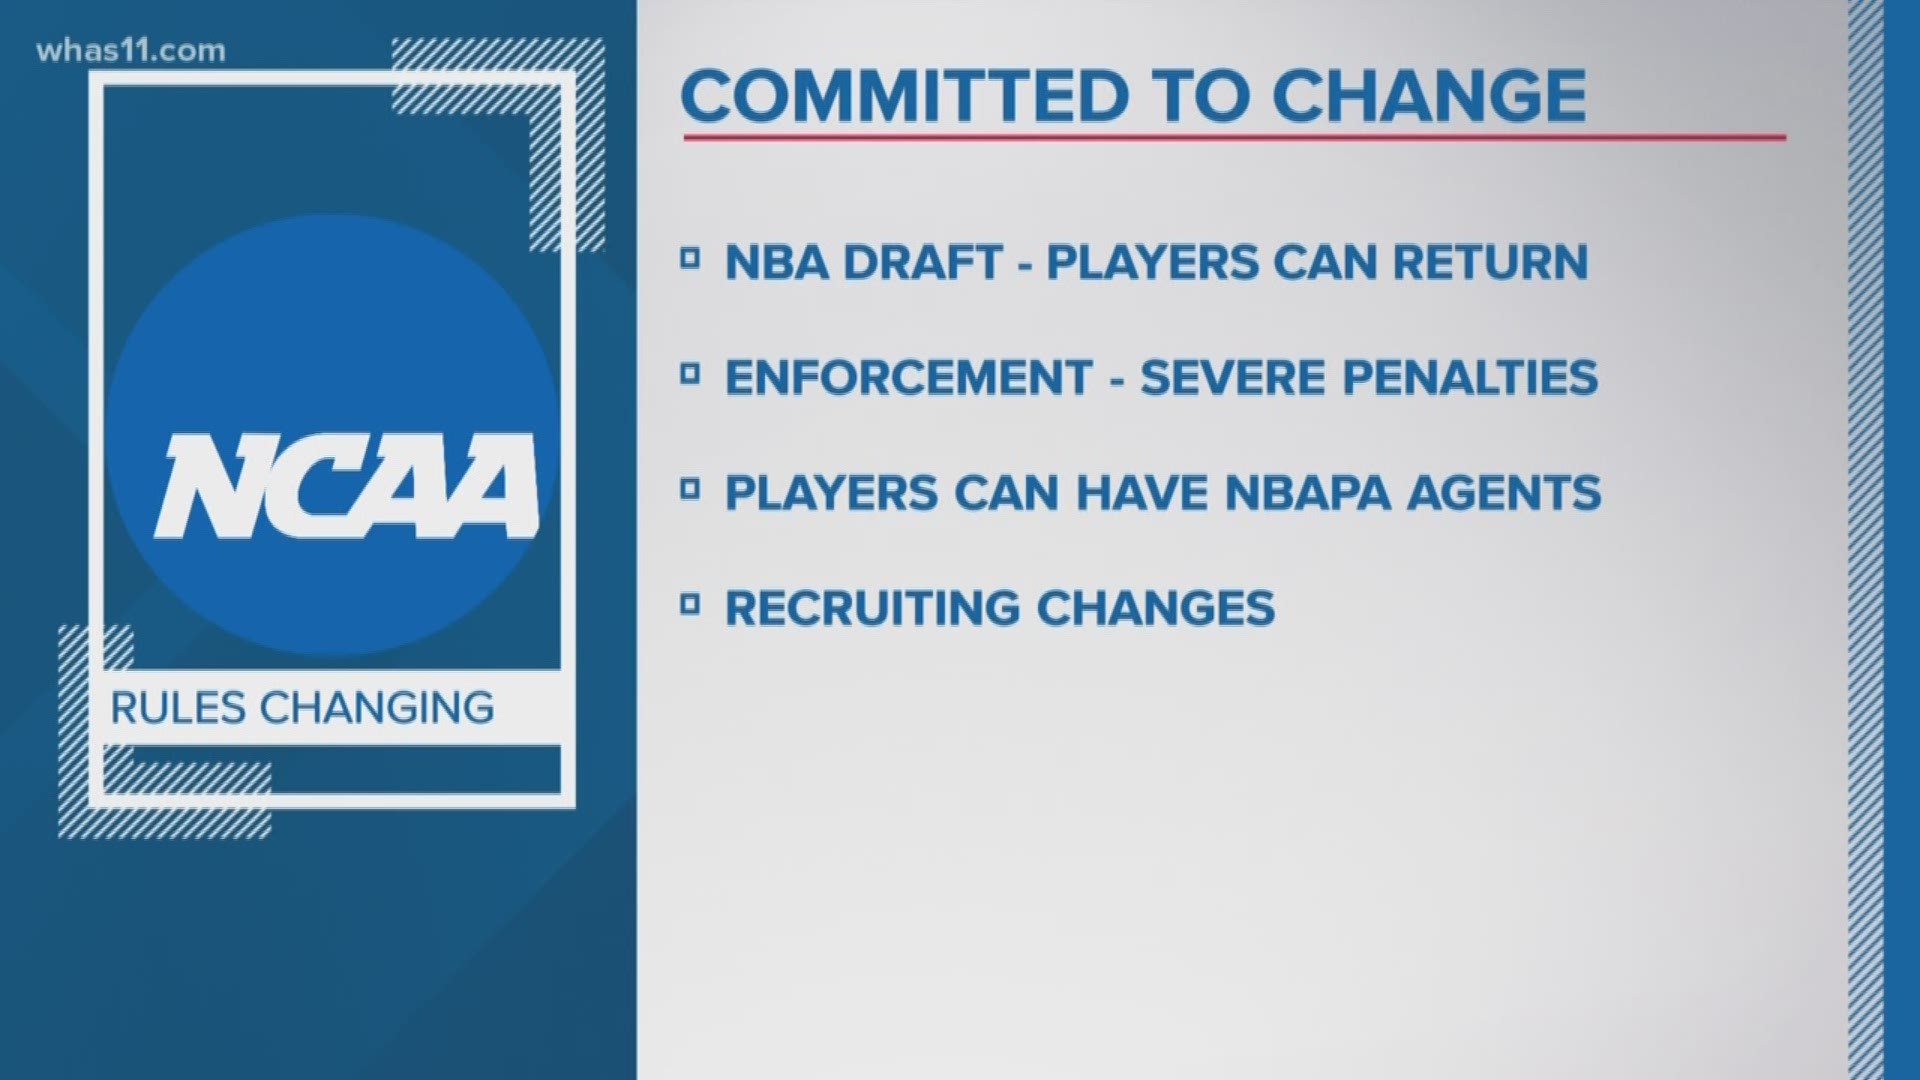 The NCAA announced several changes when it comes to college basketball in the wake of the FBI scandal that rocked basketball.